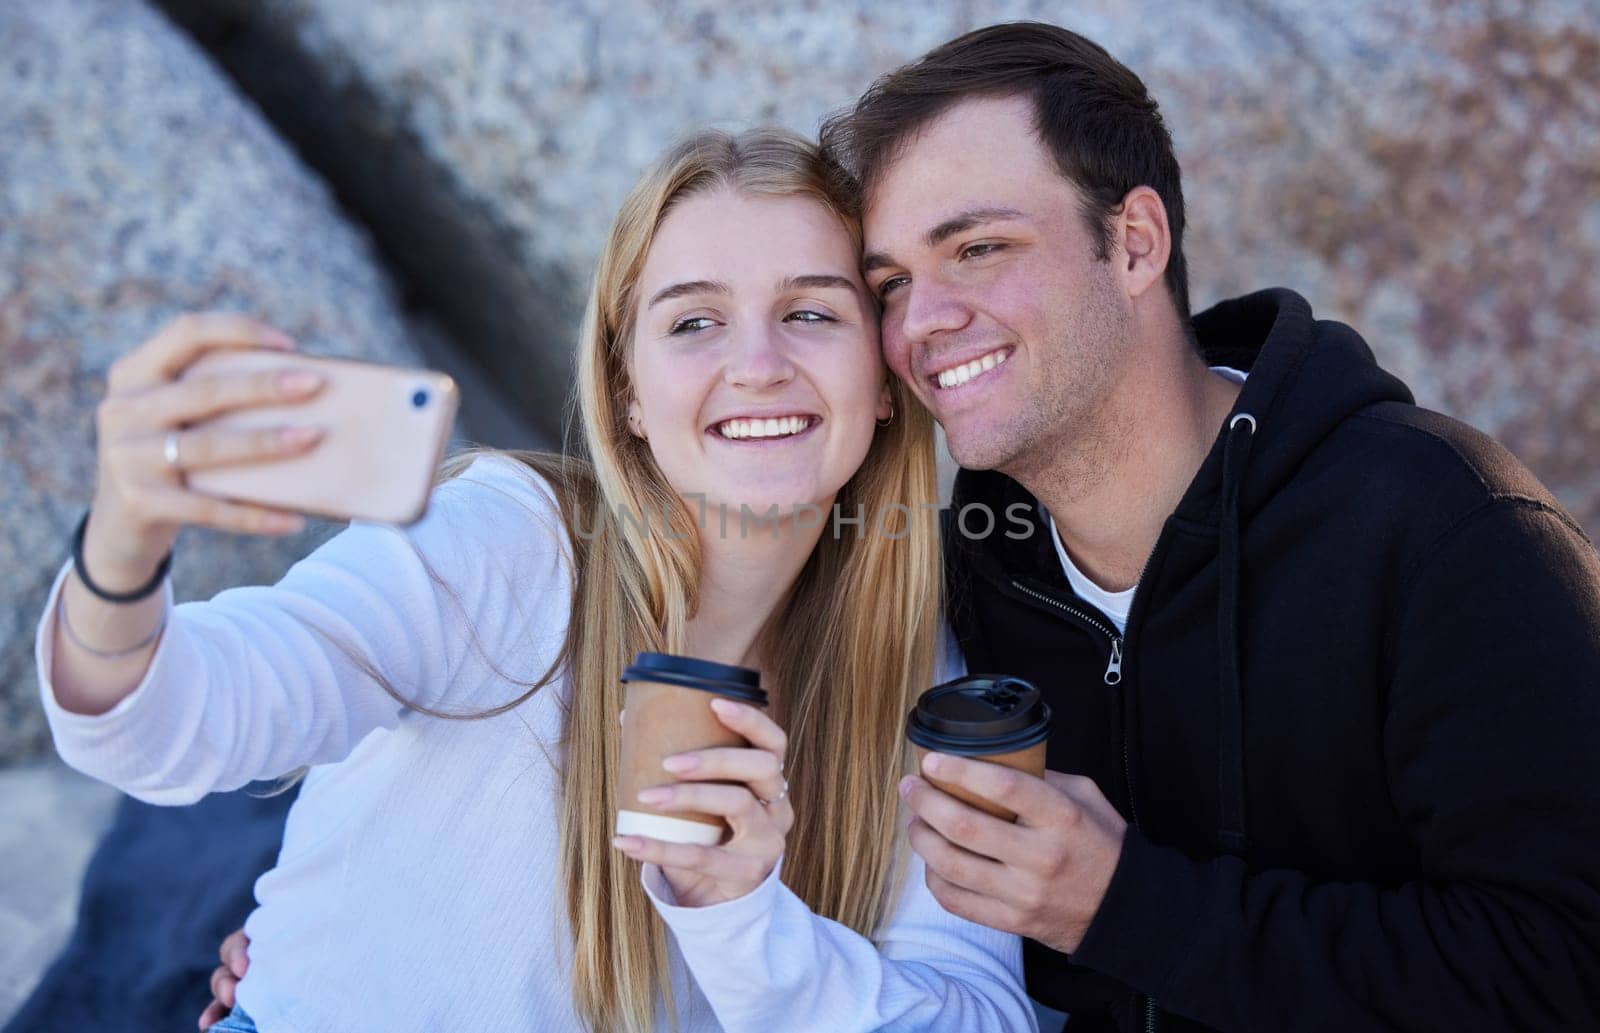 Love, selfie and couple outdoor, smile and summer vacation for relationship, romance and bonding. Romantic, man and woman with smartphone, picture for memory or loving together on break and affection.